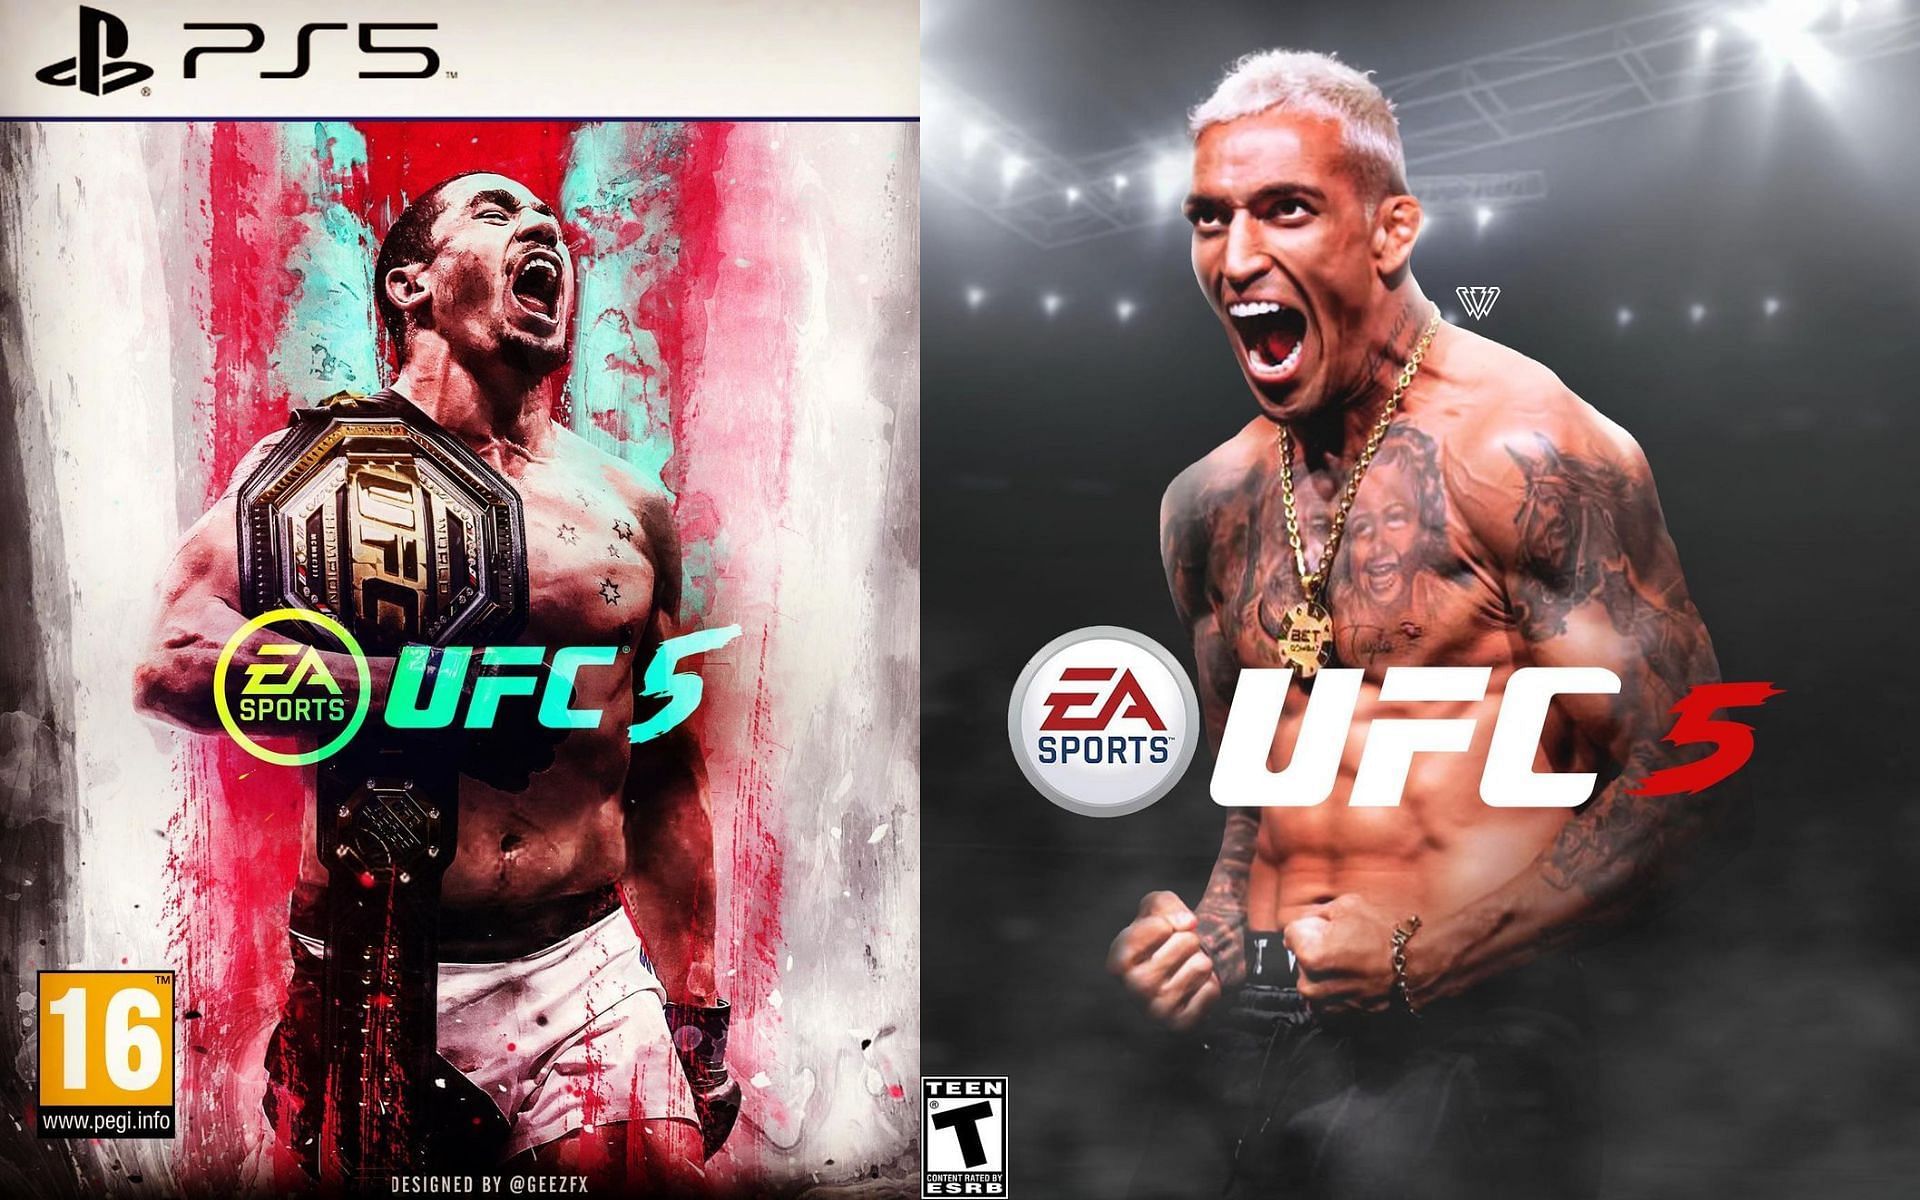 UFC 5 release date What is the tentative timeline provided by EA Sports?